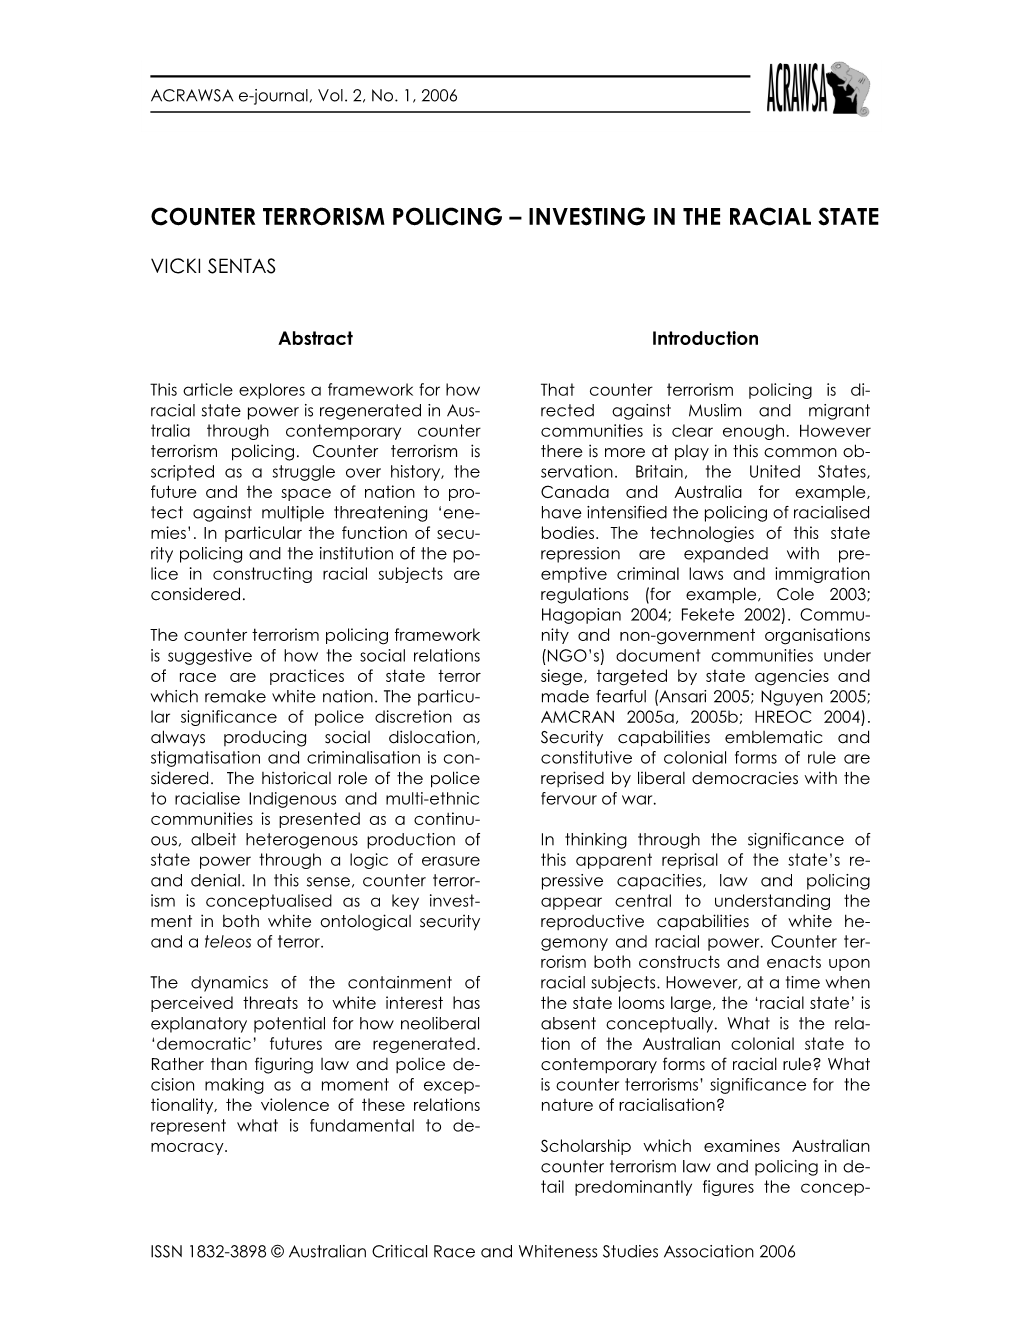 Counter Terrorism Policing – Investing in the Racial State